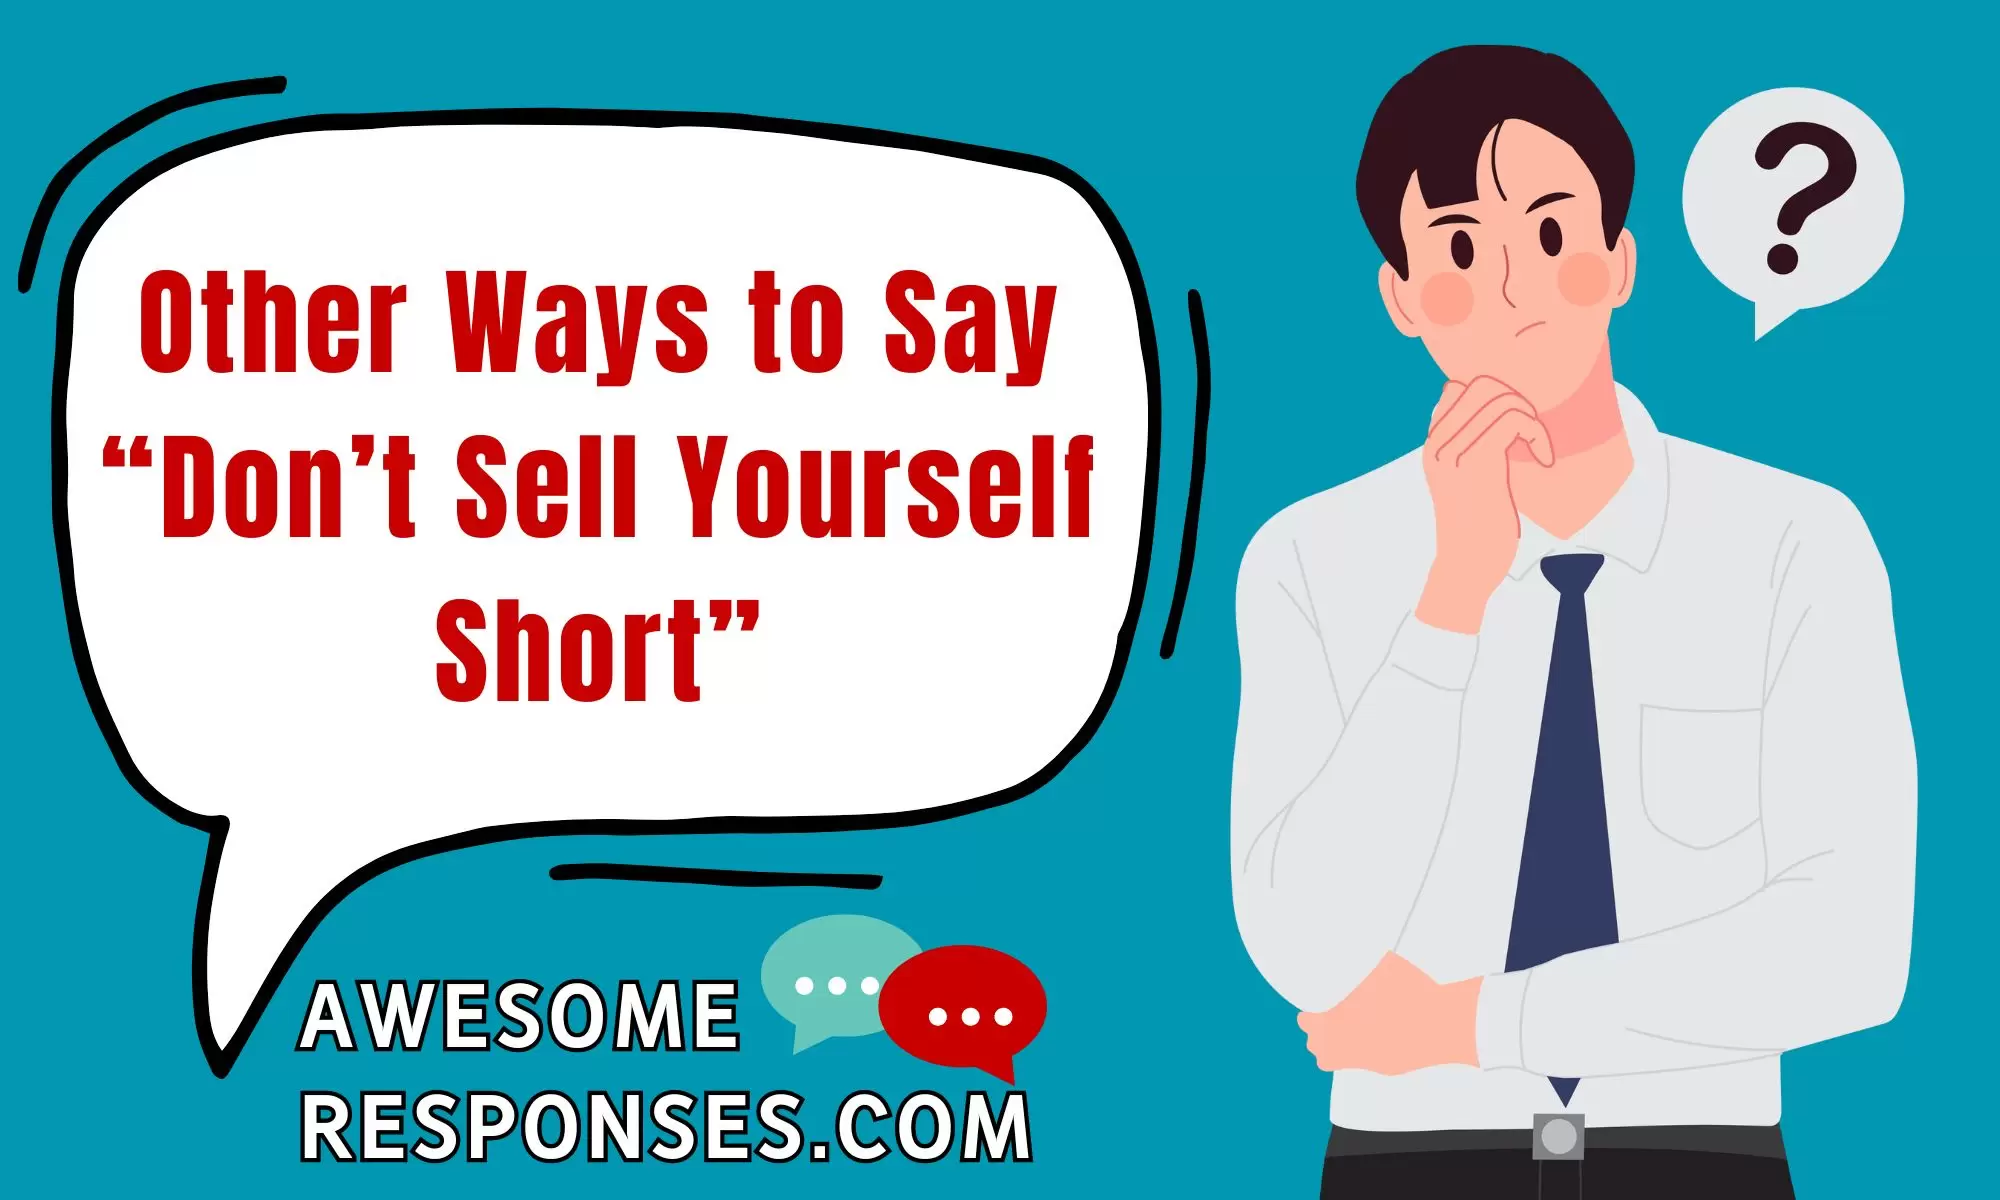 Other Ways to Say “Don’t Sell Yourself Short”